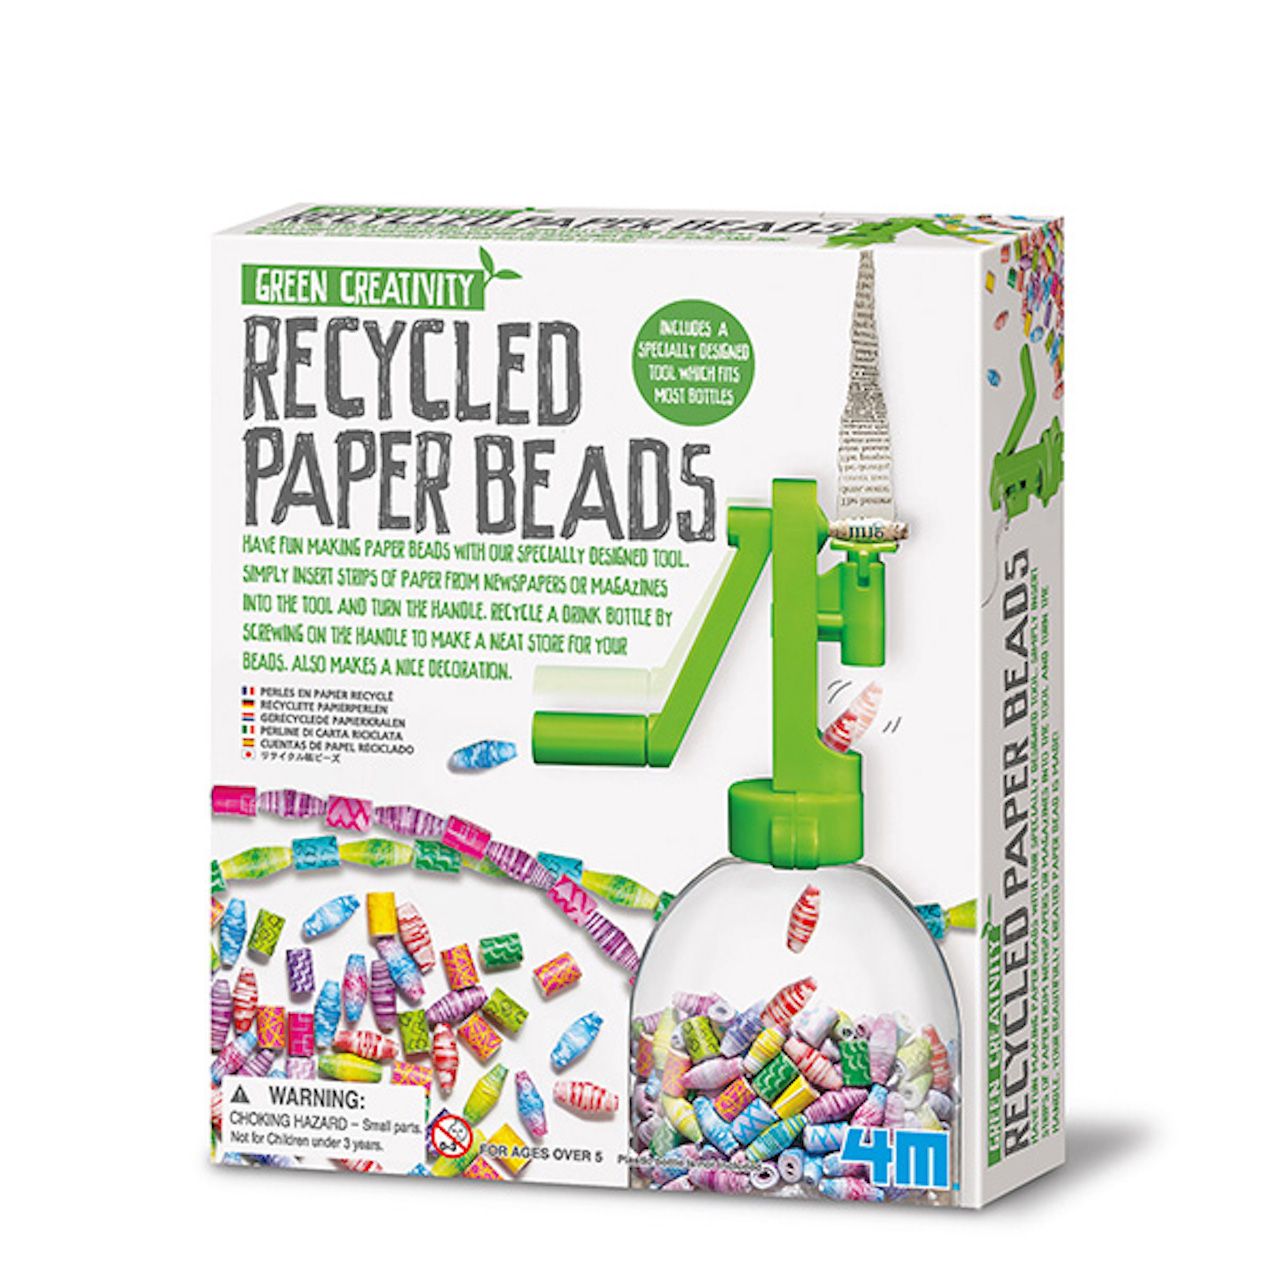 box for recycled paper beads toy